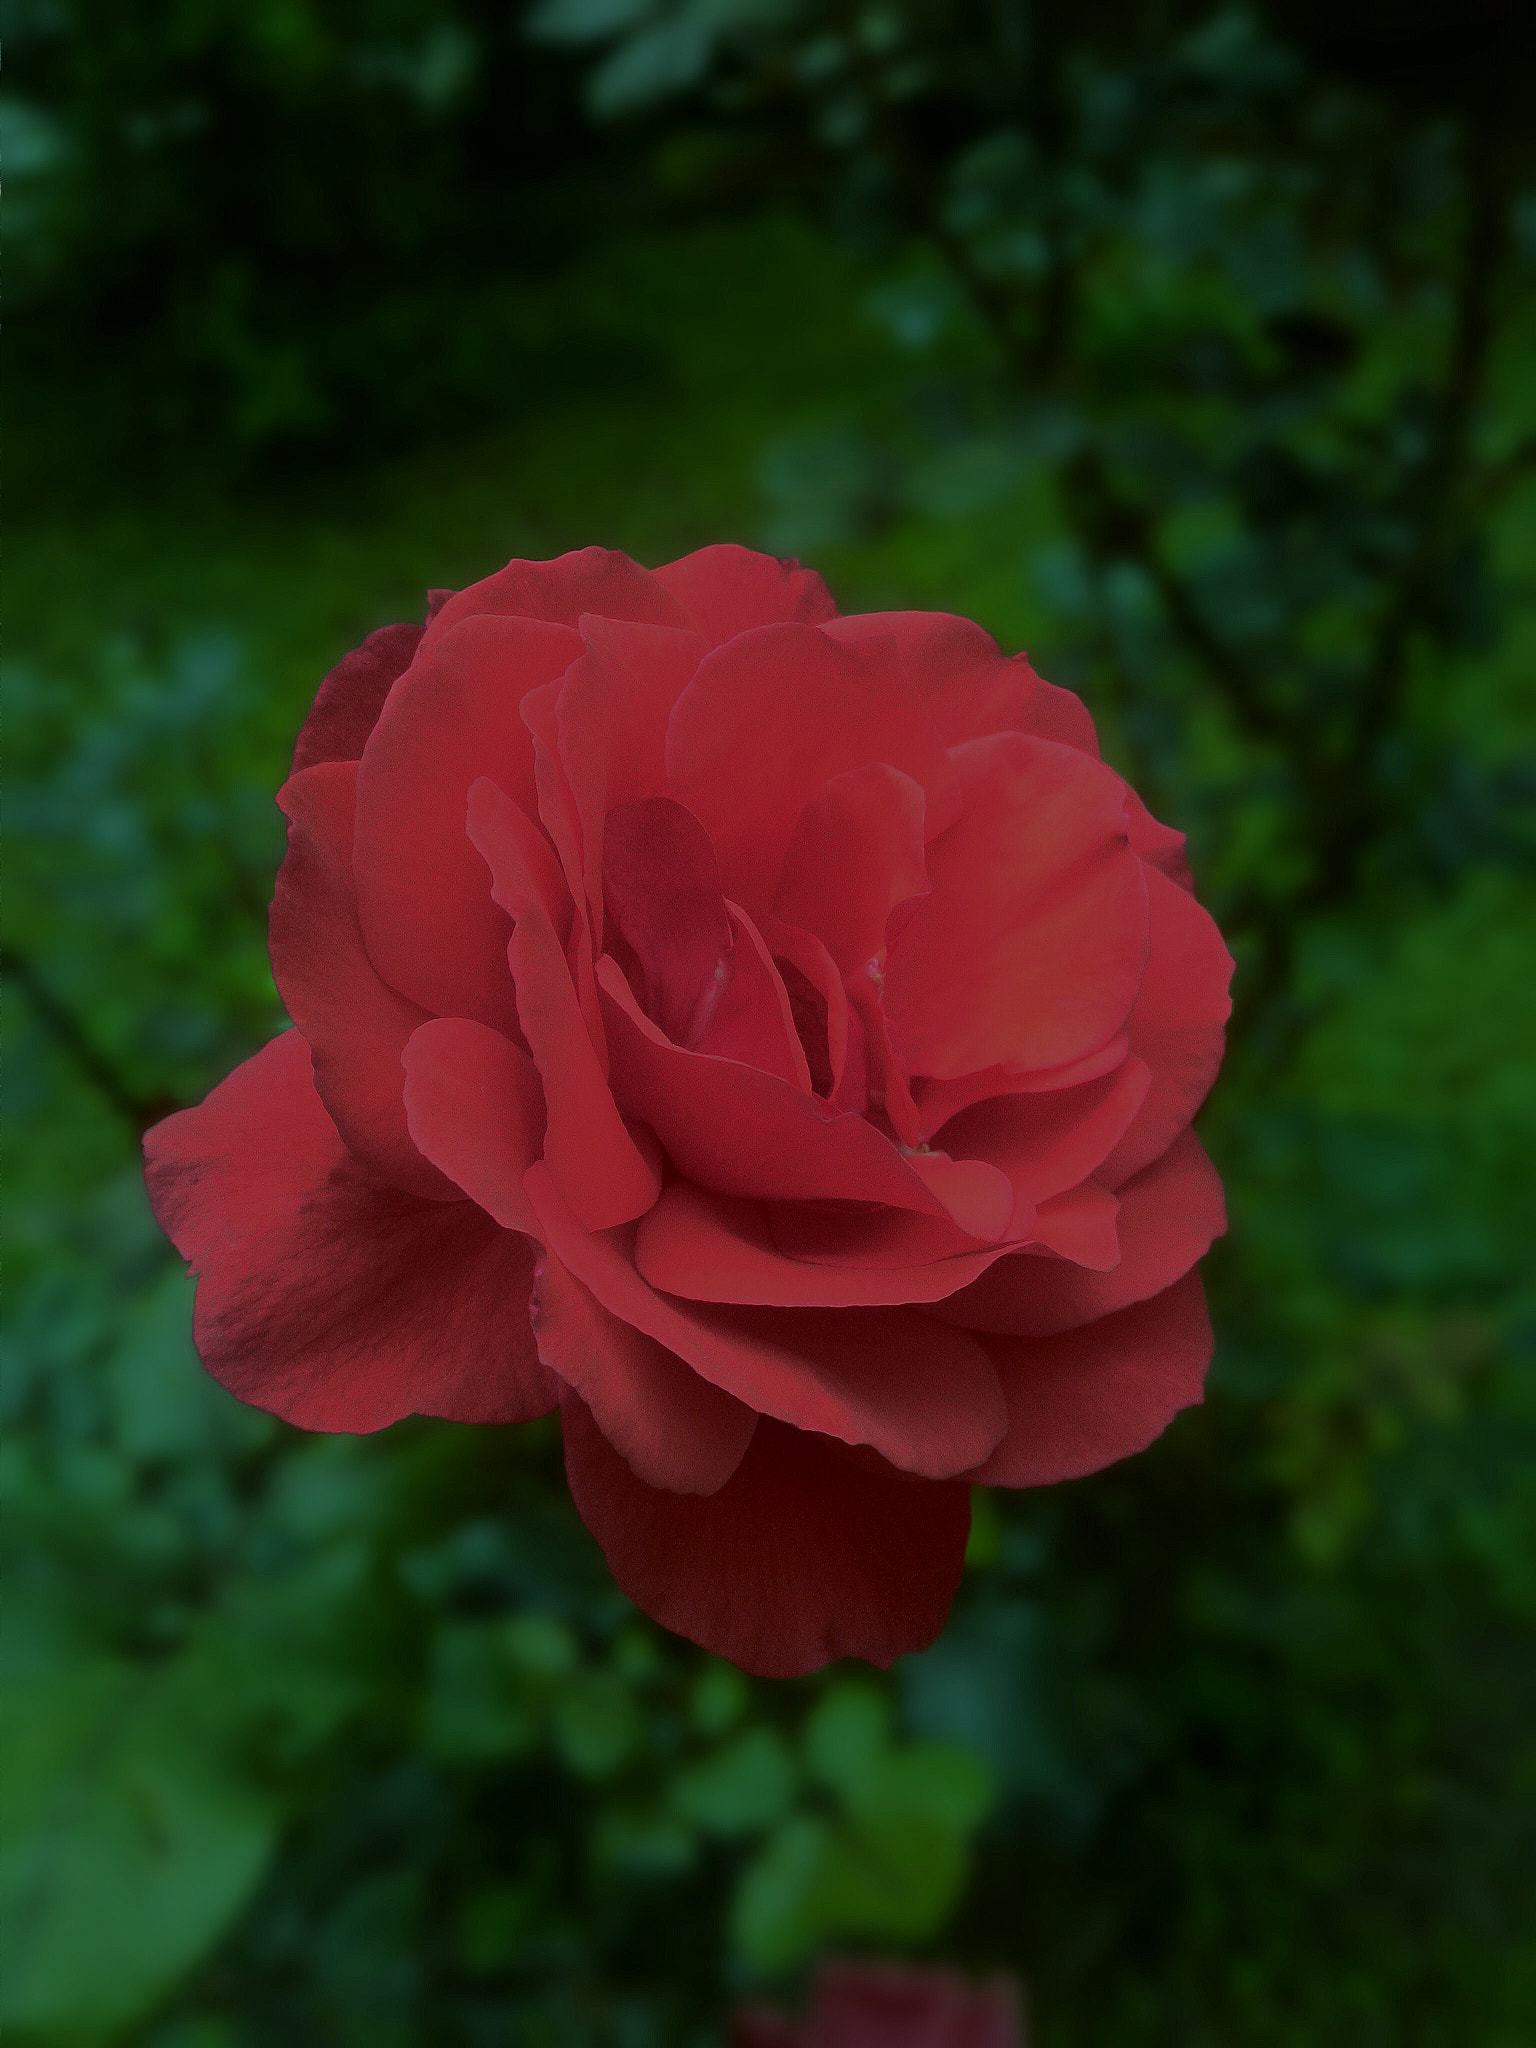 ASUS Z002 sample photo. My rose photography